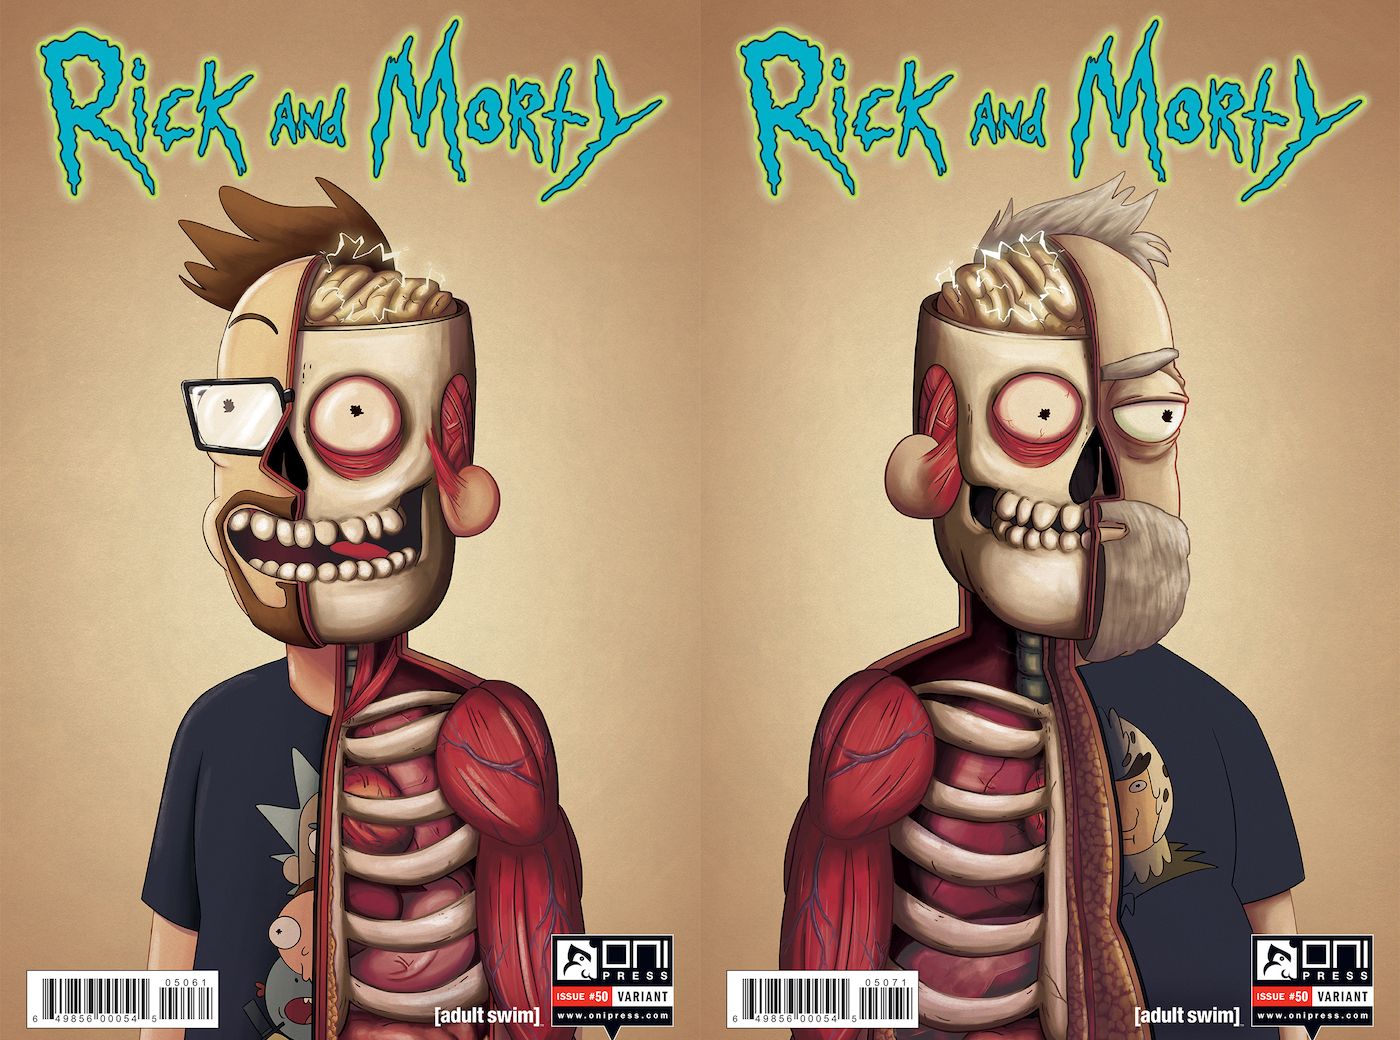 Rick and Morty Issue 50 Variant Covers